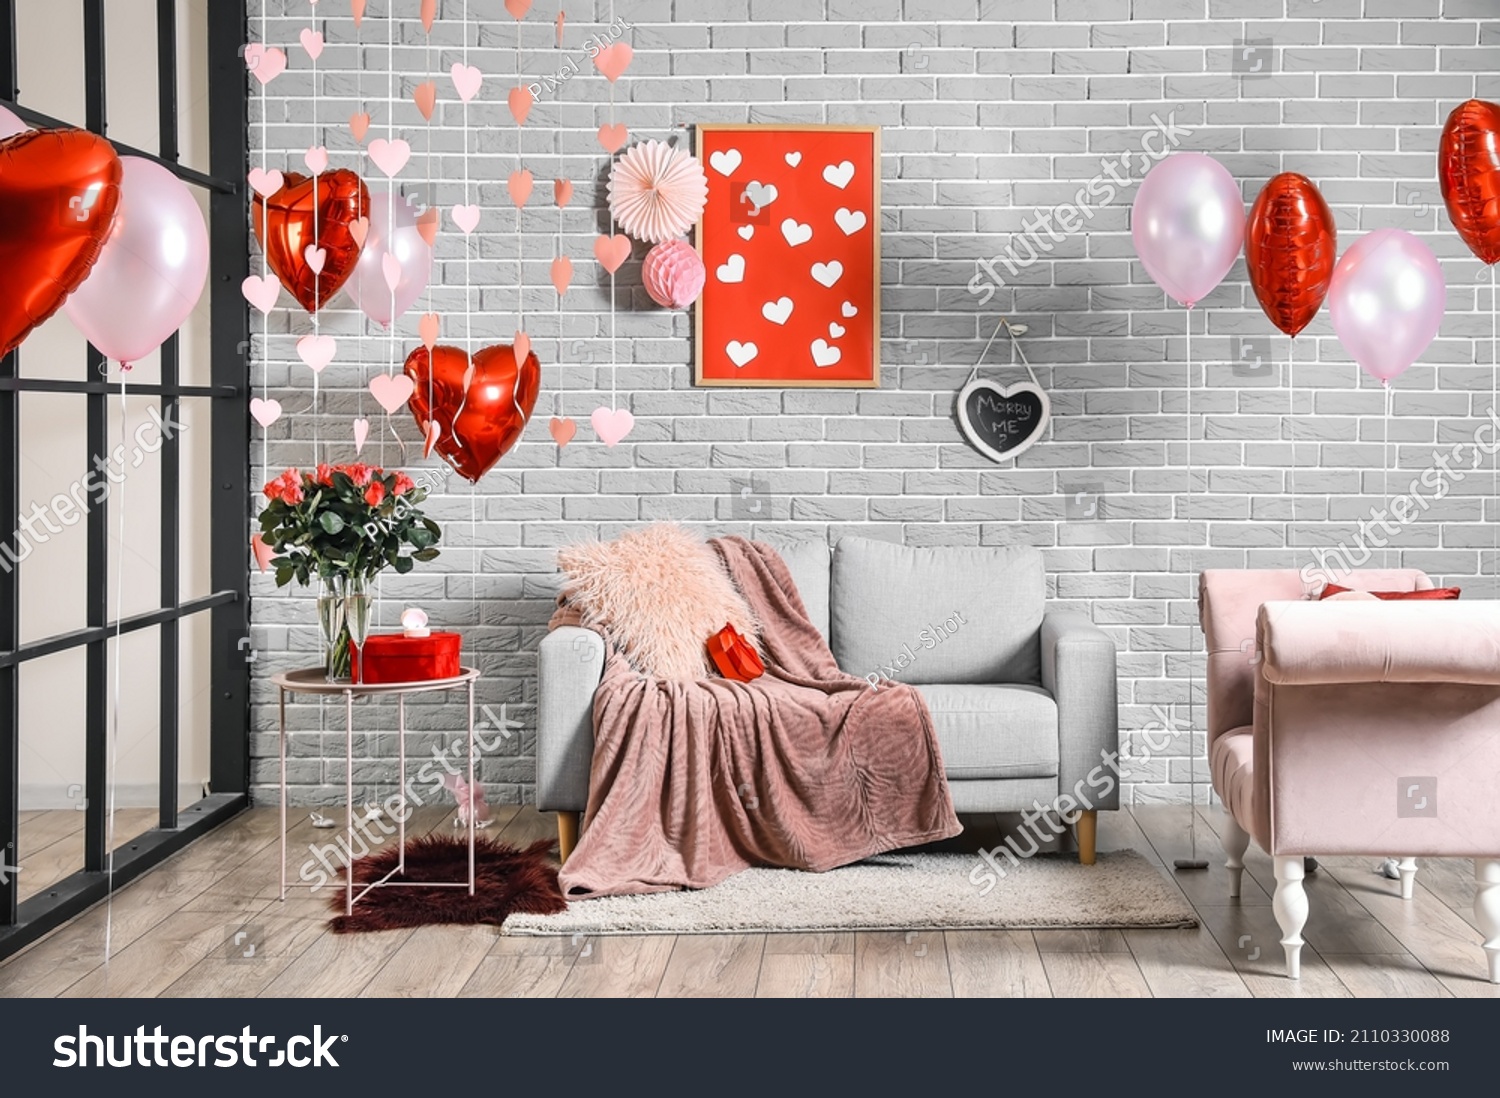 Interior of room decorated for Valentine's day with air balloons and comfortable sofas near grey brick wall #2110330088